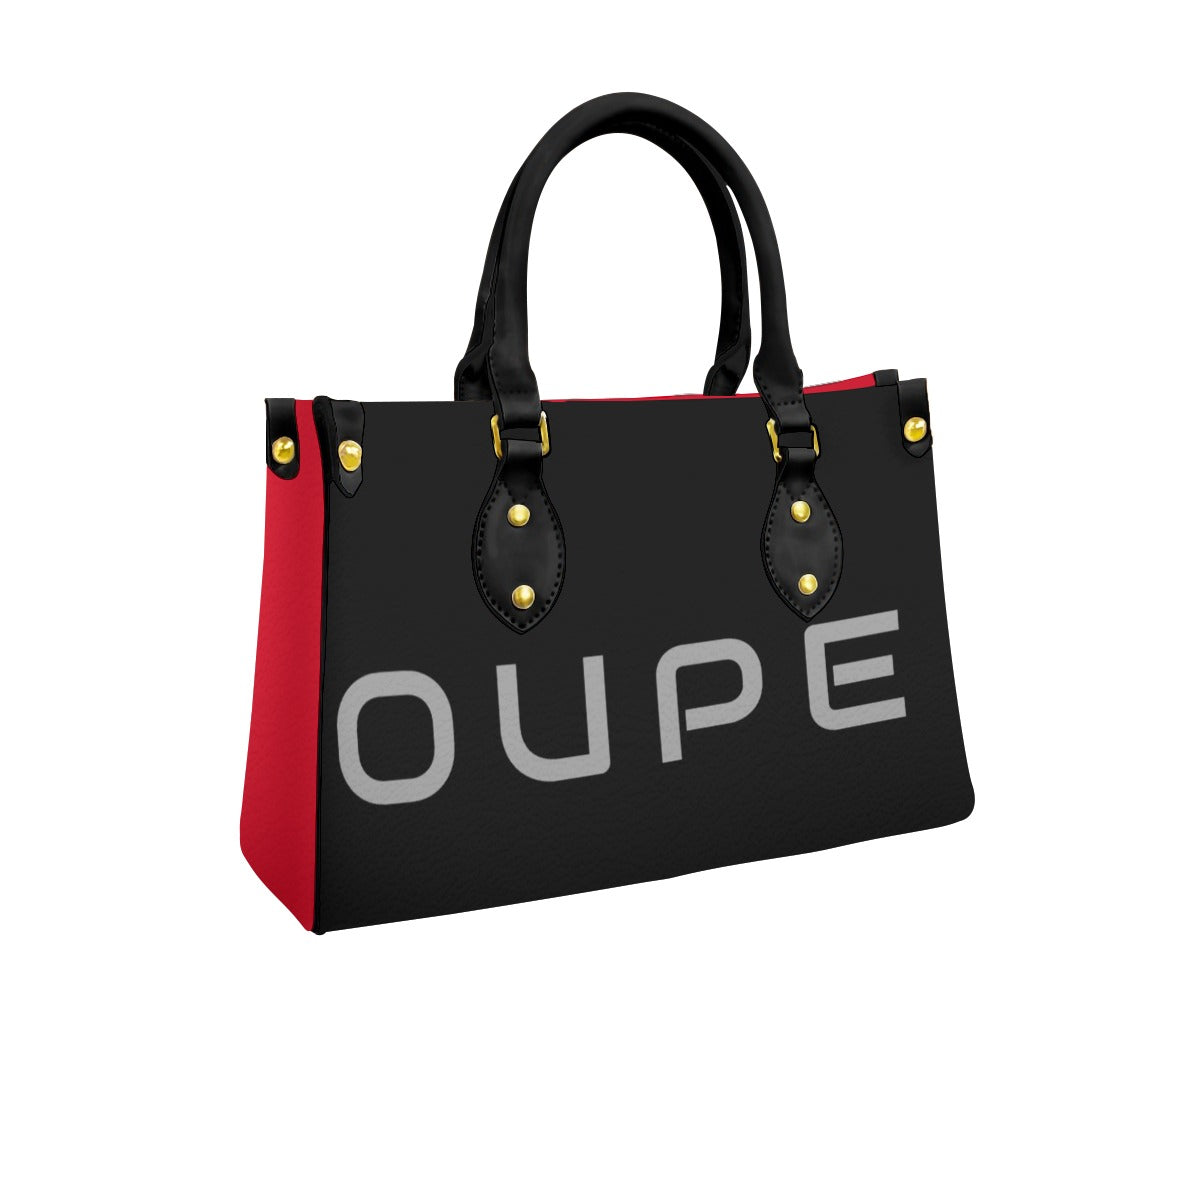 AC BAROQUE "OUPE" Red Women's Tote Bag With Black Handle